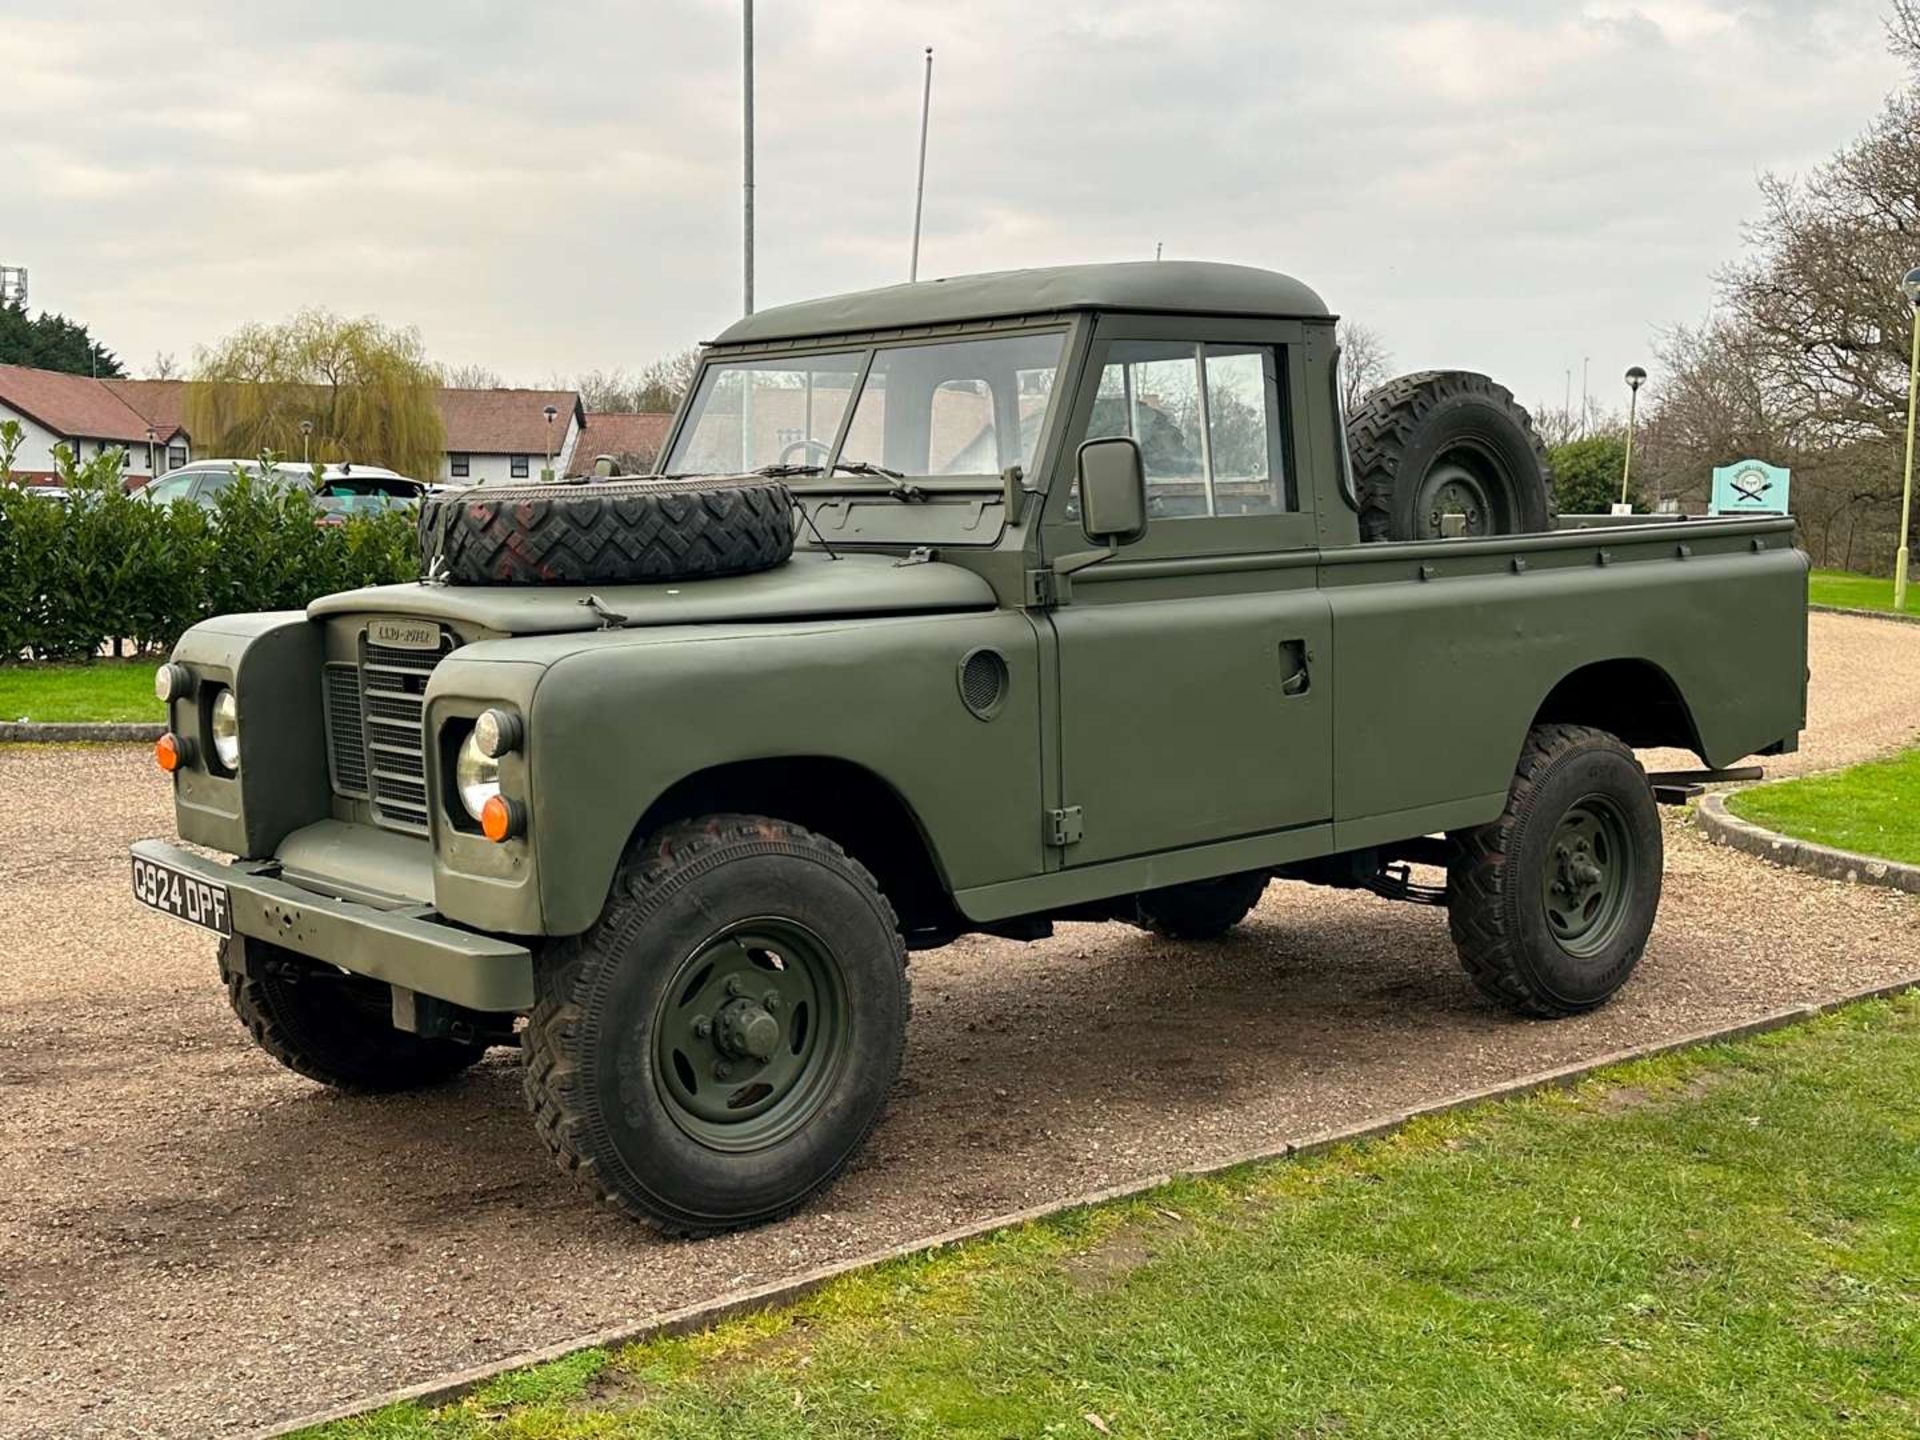 1992 LAND ROVER SERIES III PICK-UP - Image 3 of 25